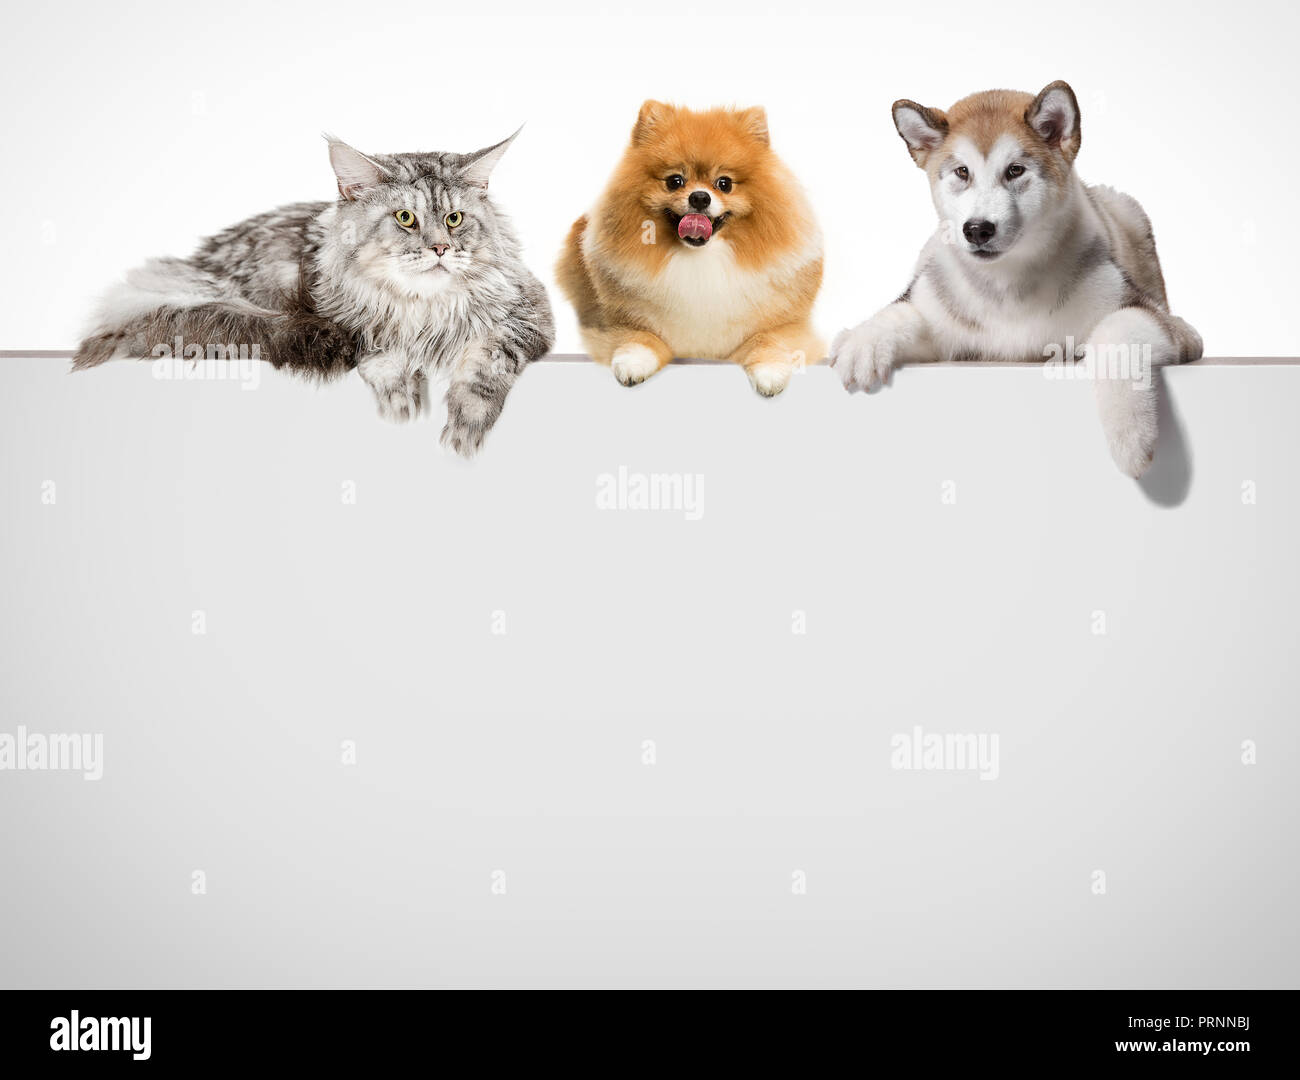 Row of cats and dogs hanging their paws over a white banner. Image sized to fit a popular social media timeline photo placeholder Stock Photo